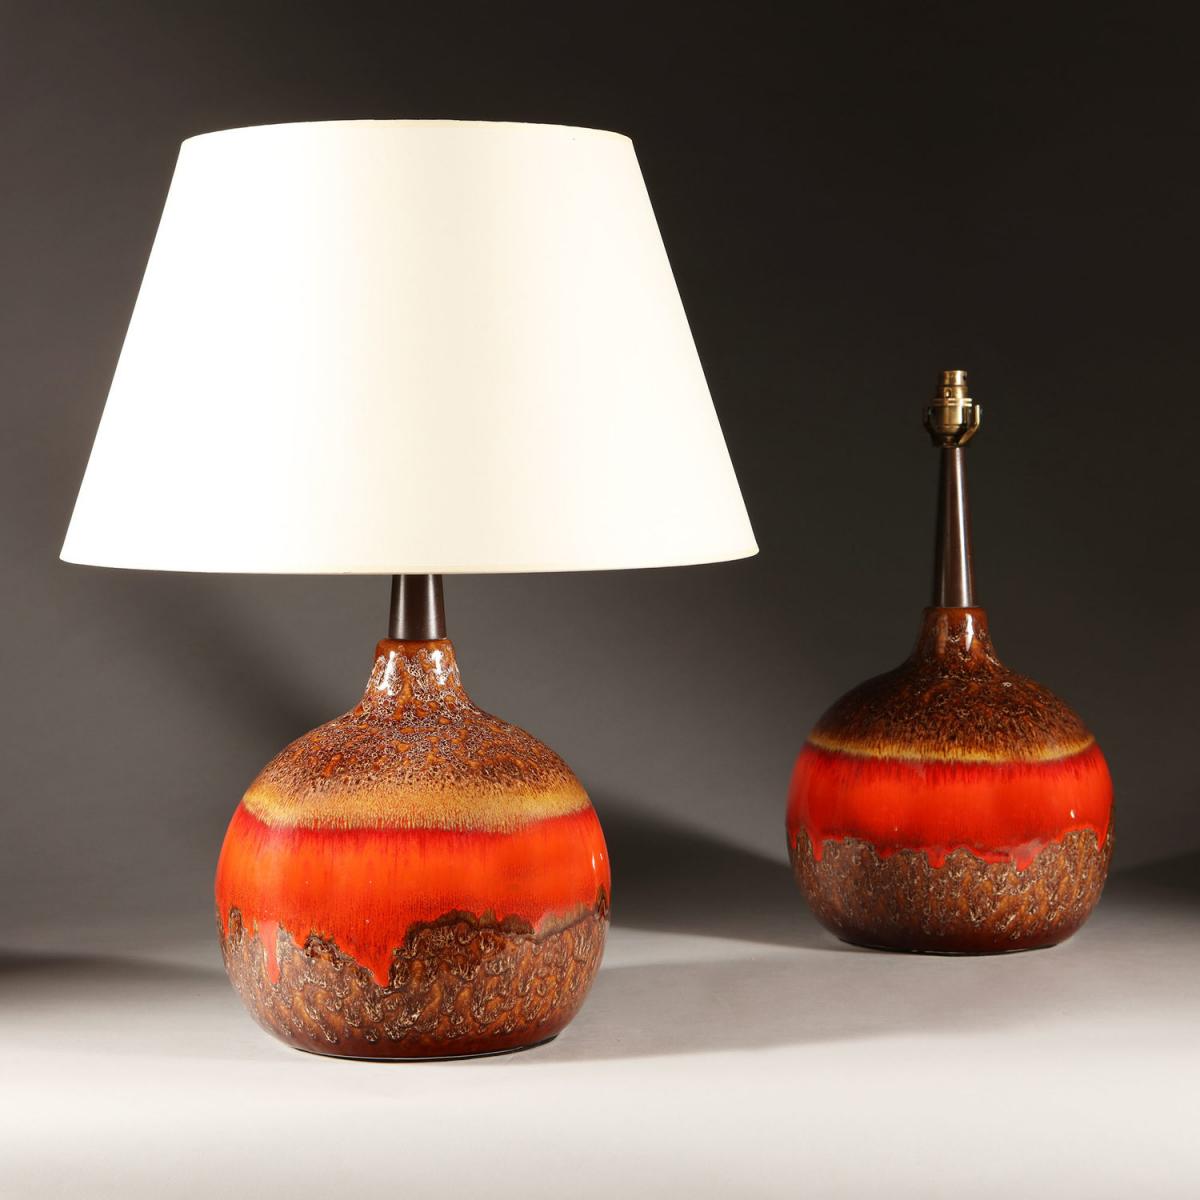 A Pair of Art Pottery Vases as Lamps